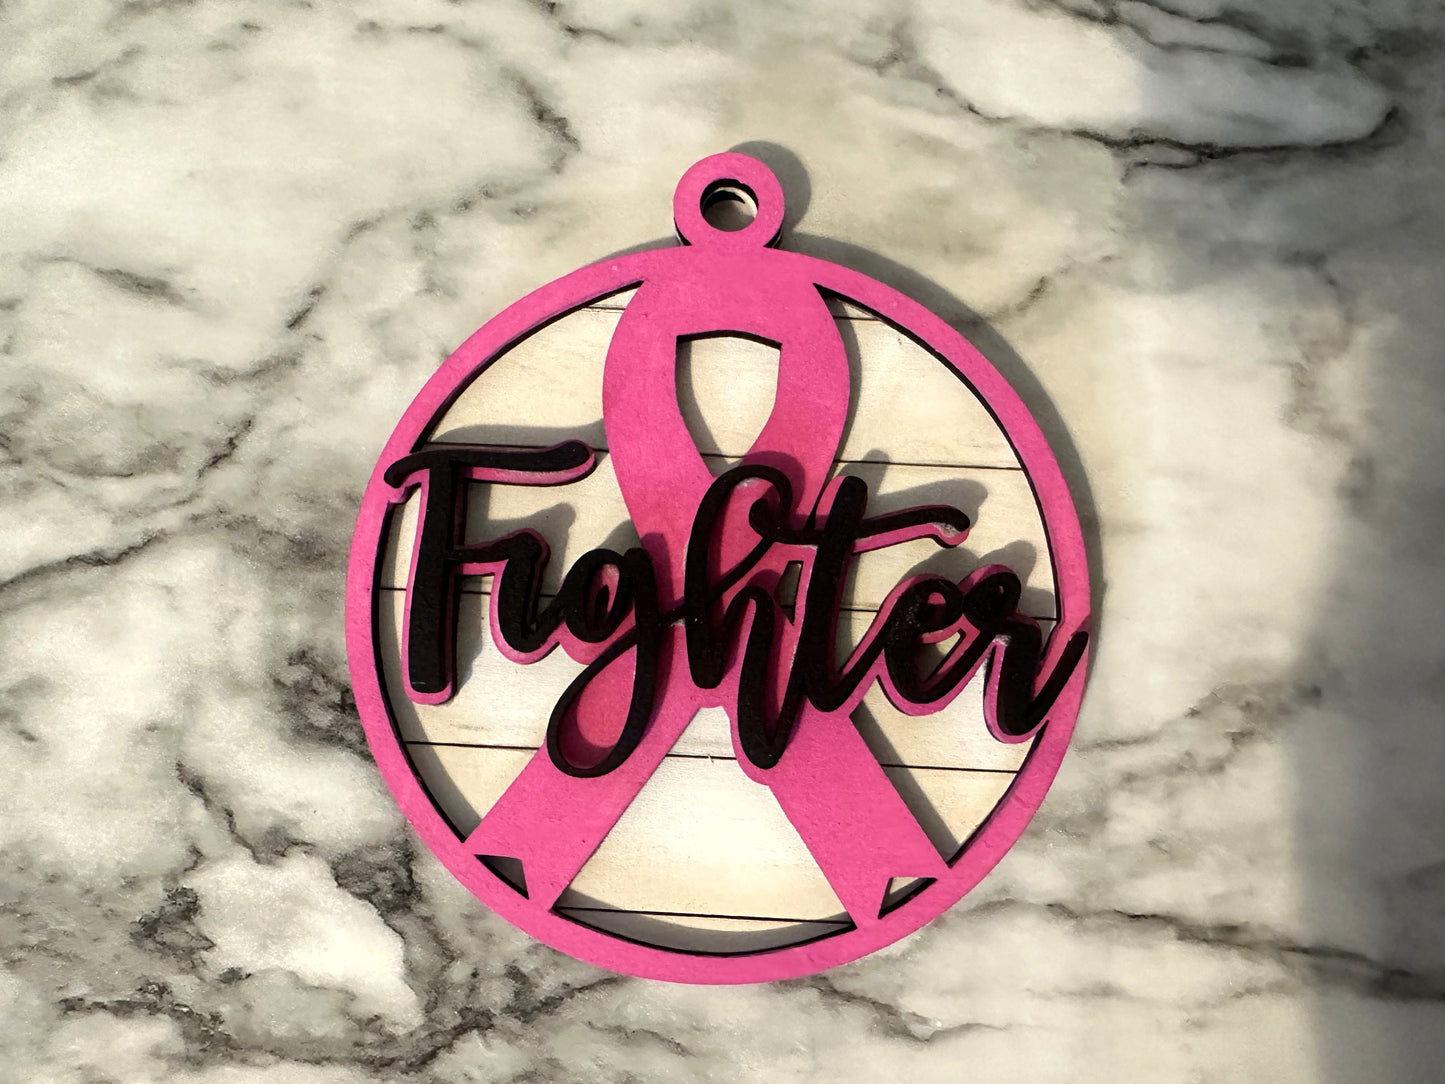 Breast Cancer Ornaments